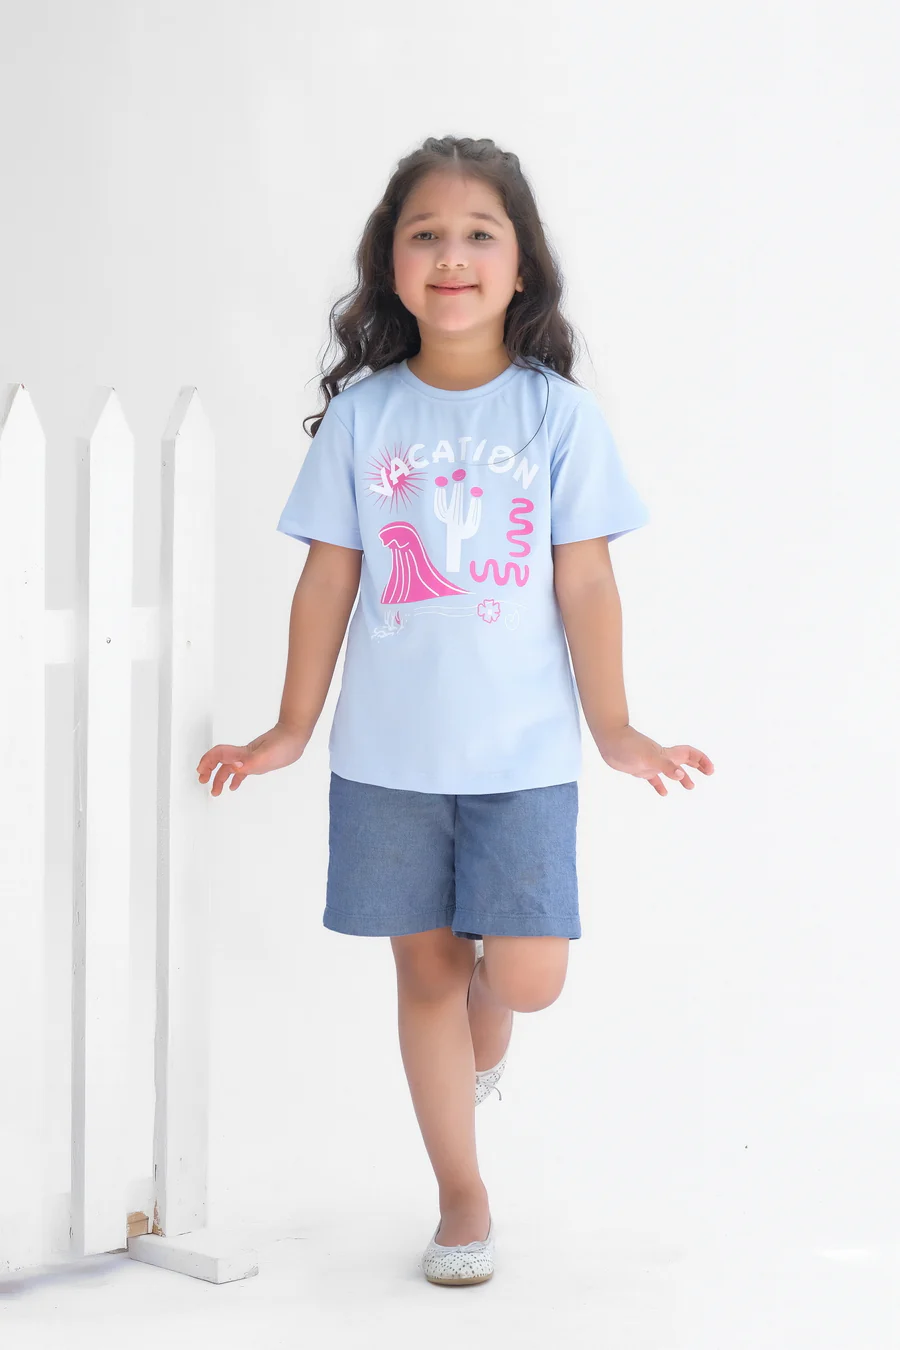 Vacations - Half Sleeves T-Shirts For Kids - Light Blue - SBT-355